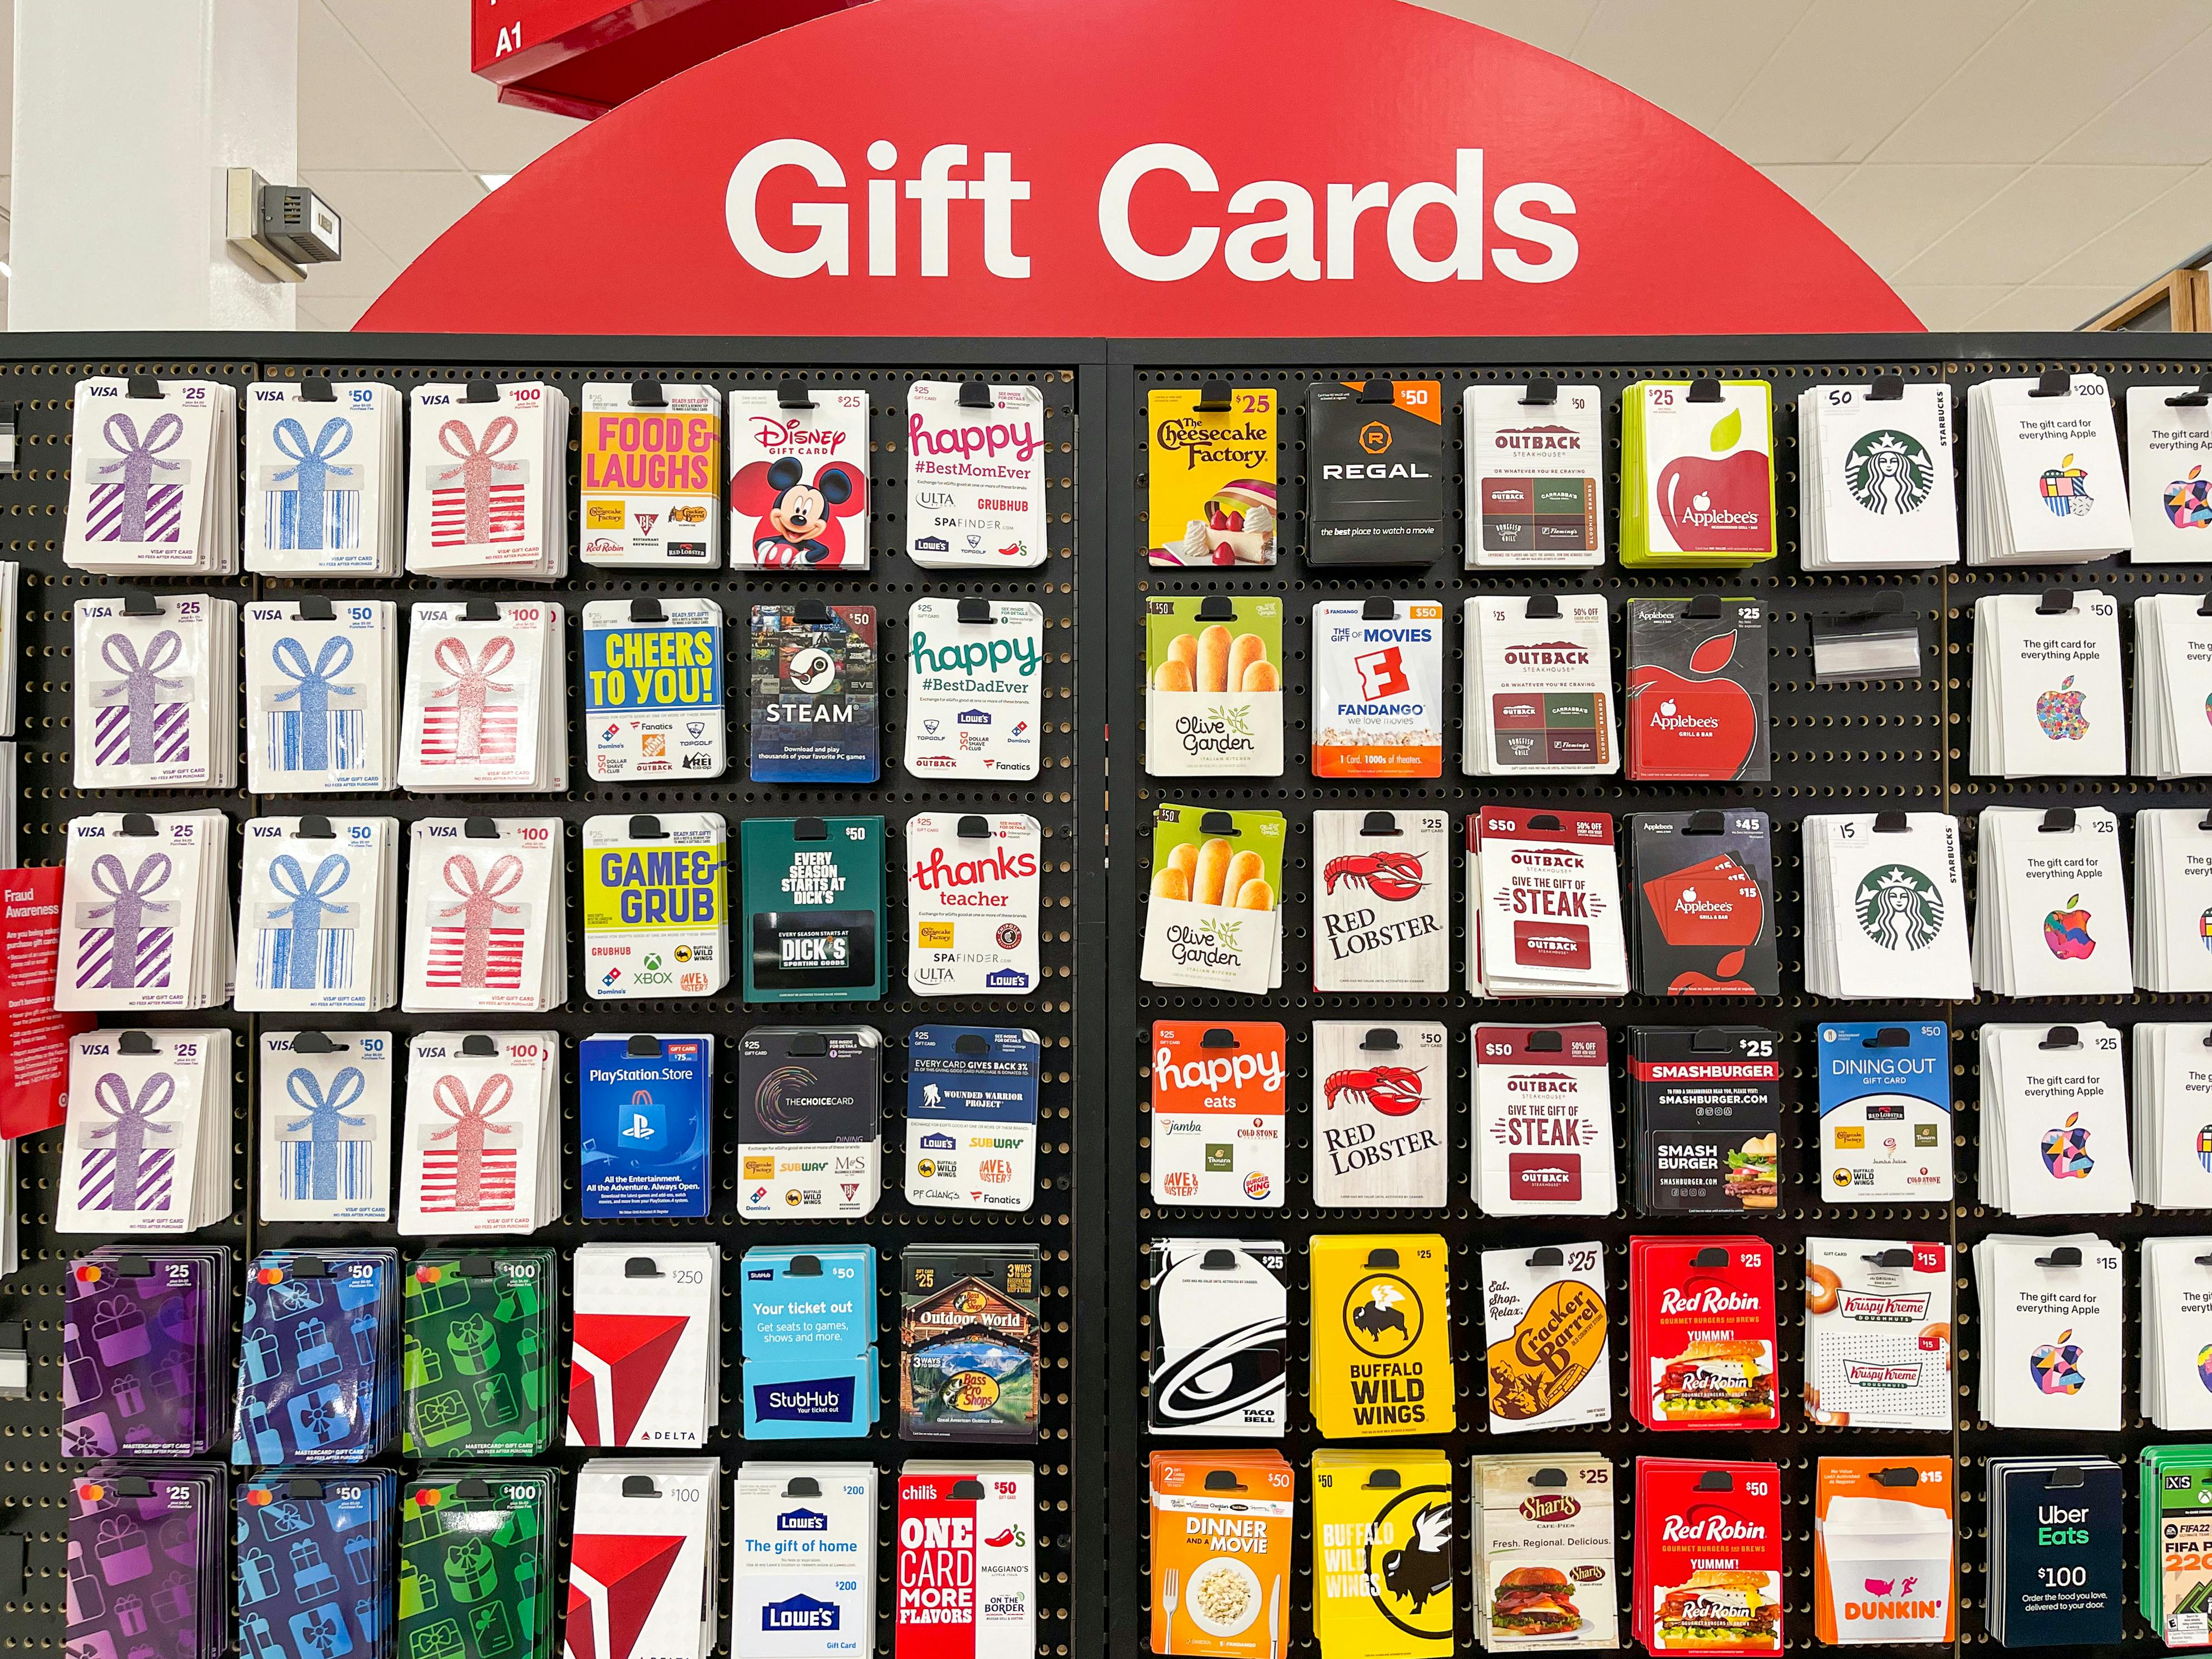 What Retailers Sell Amazon Gift Cards?